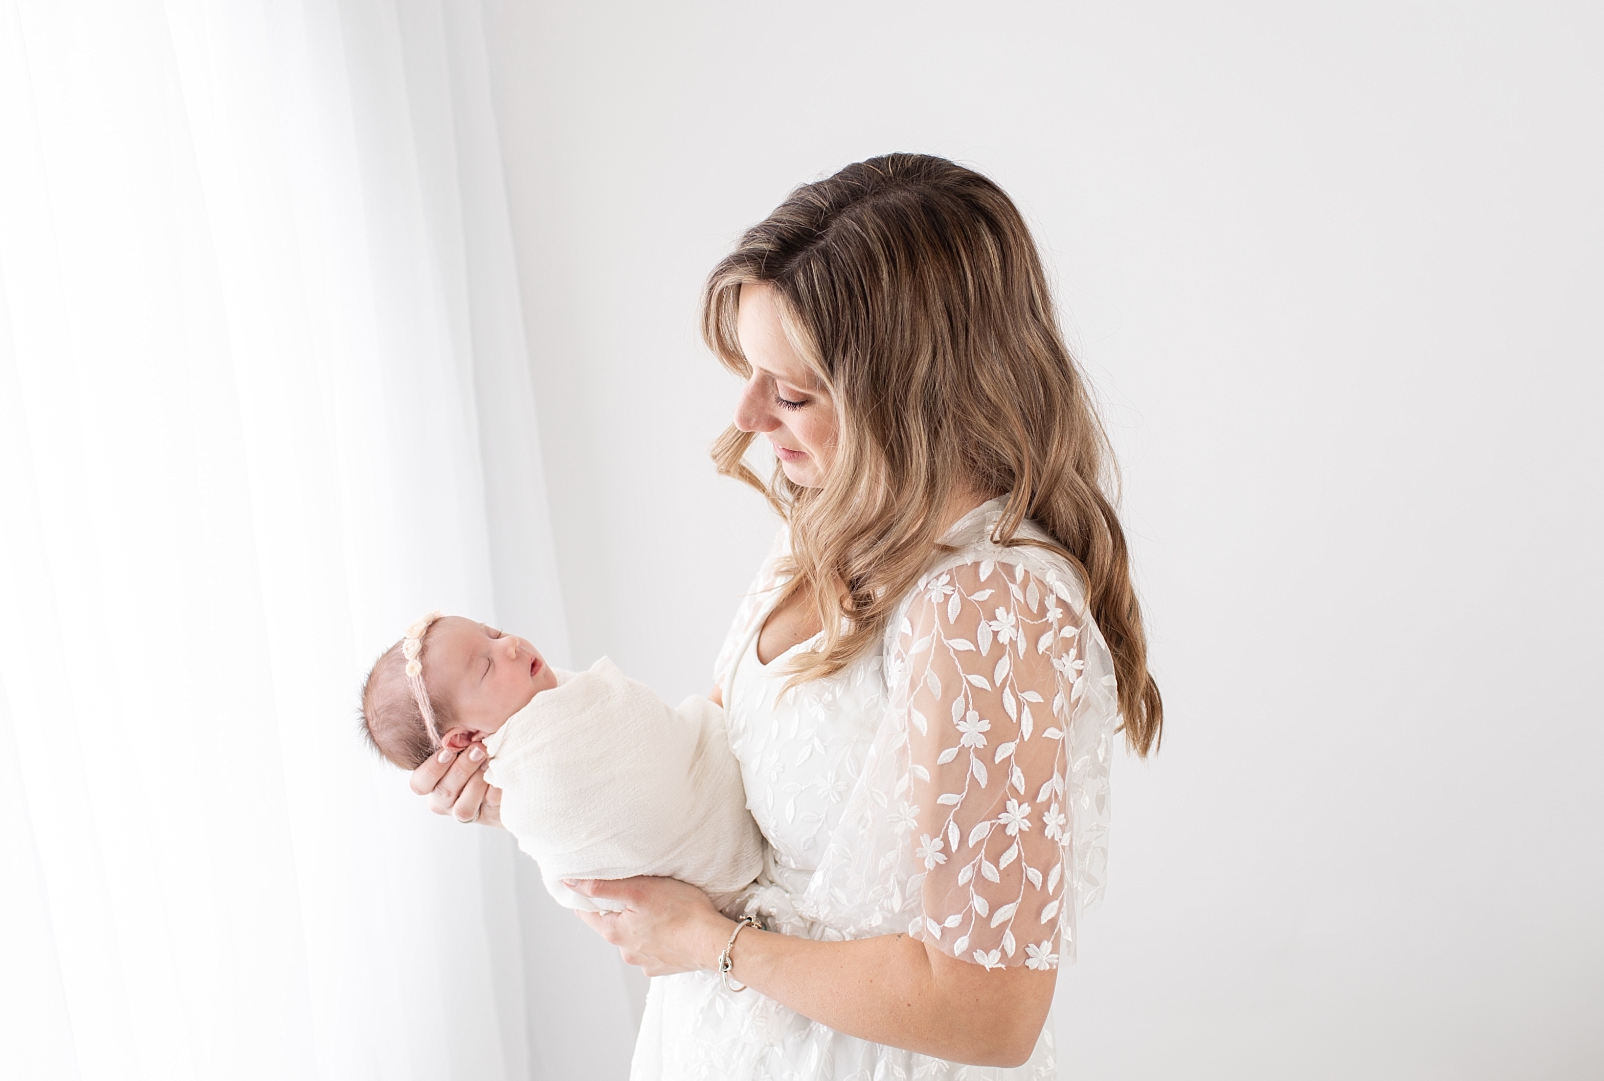 How to Choose and Download Your Digital Images - Ellicott City Newborn Photographer Rebecca Leigh Photography 0003